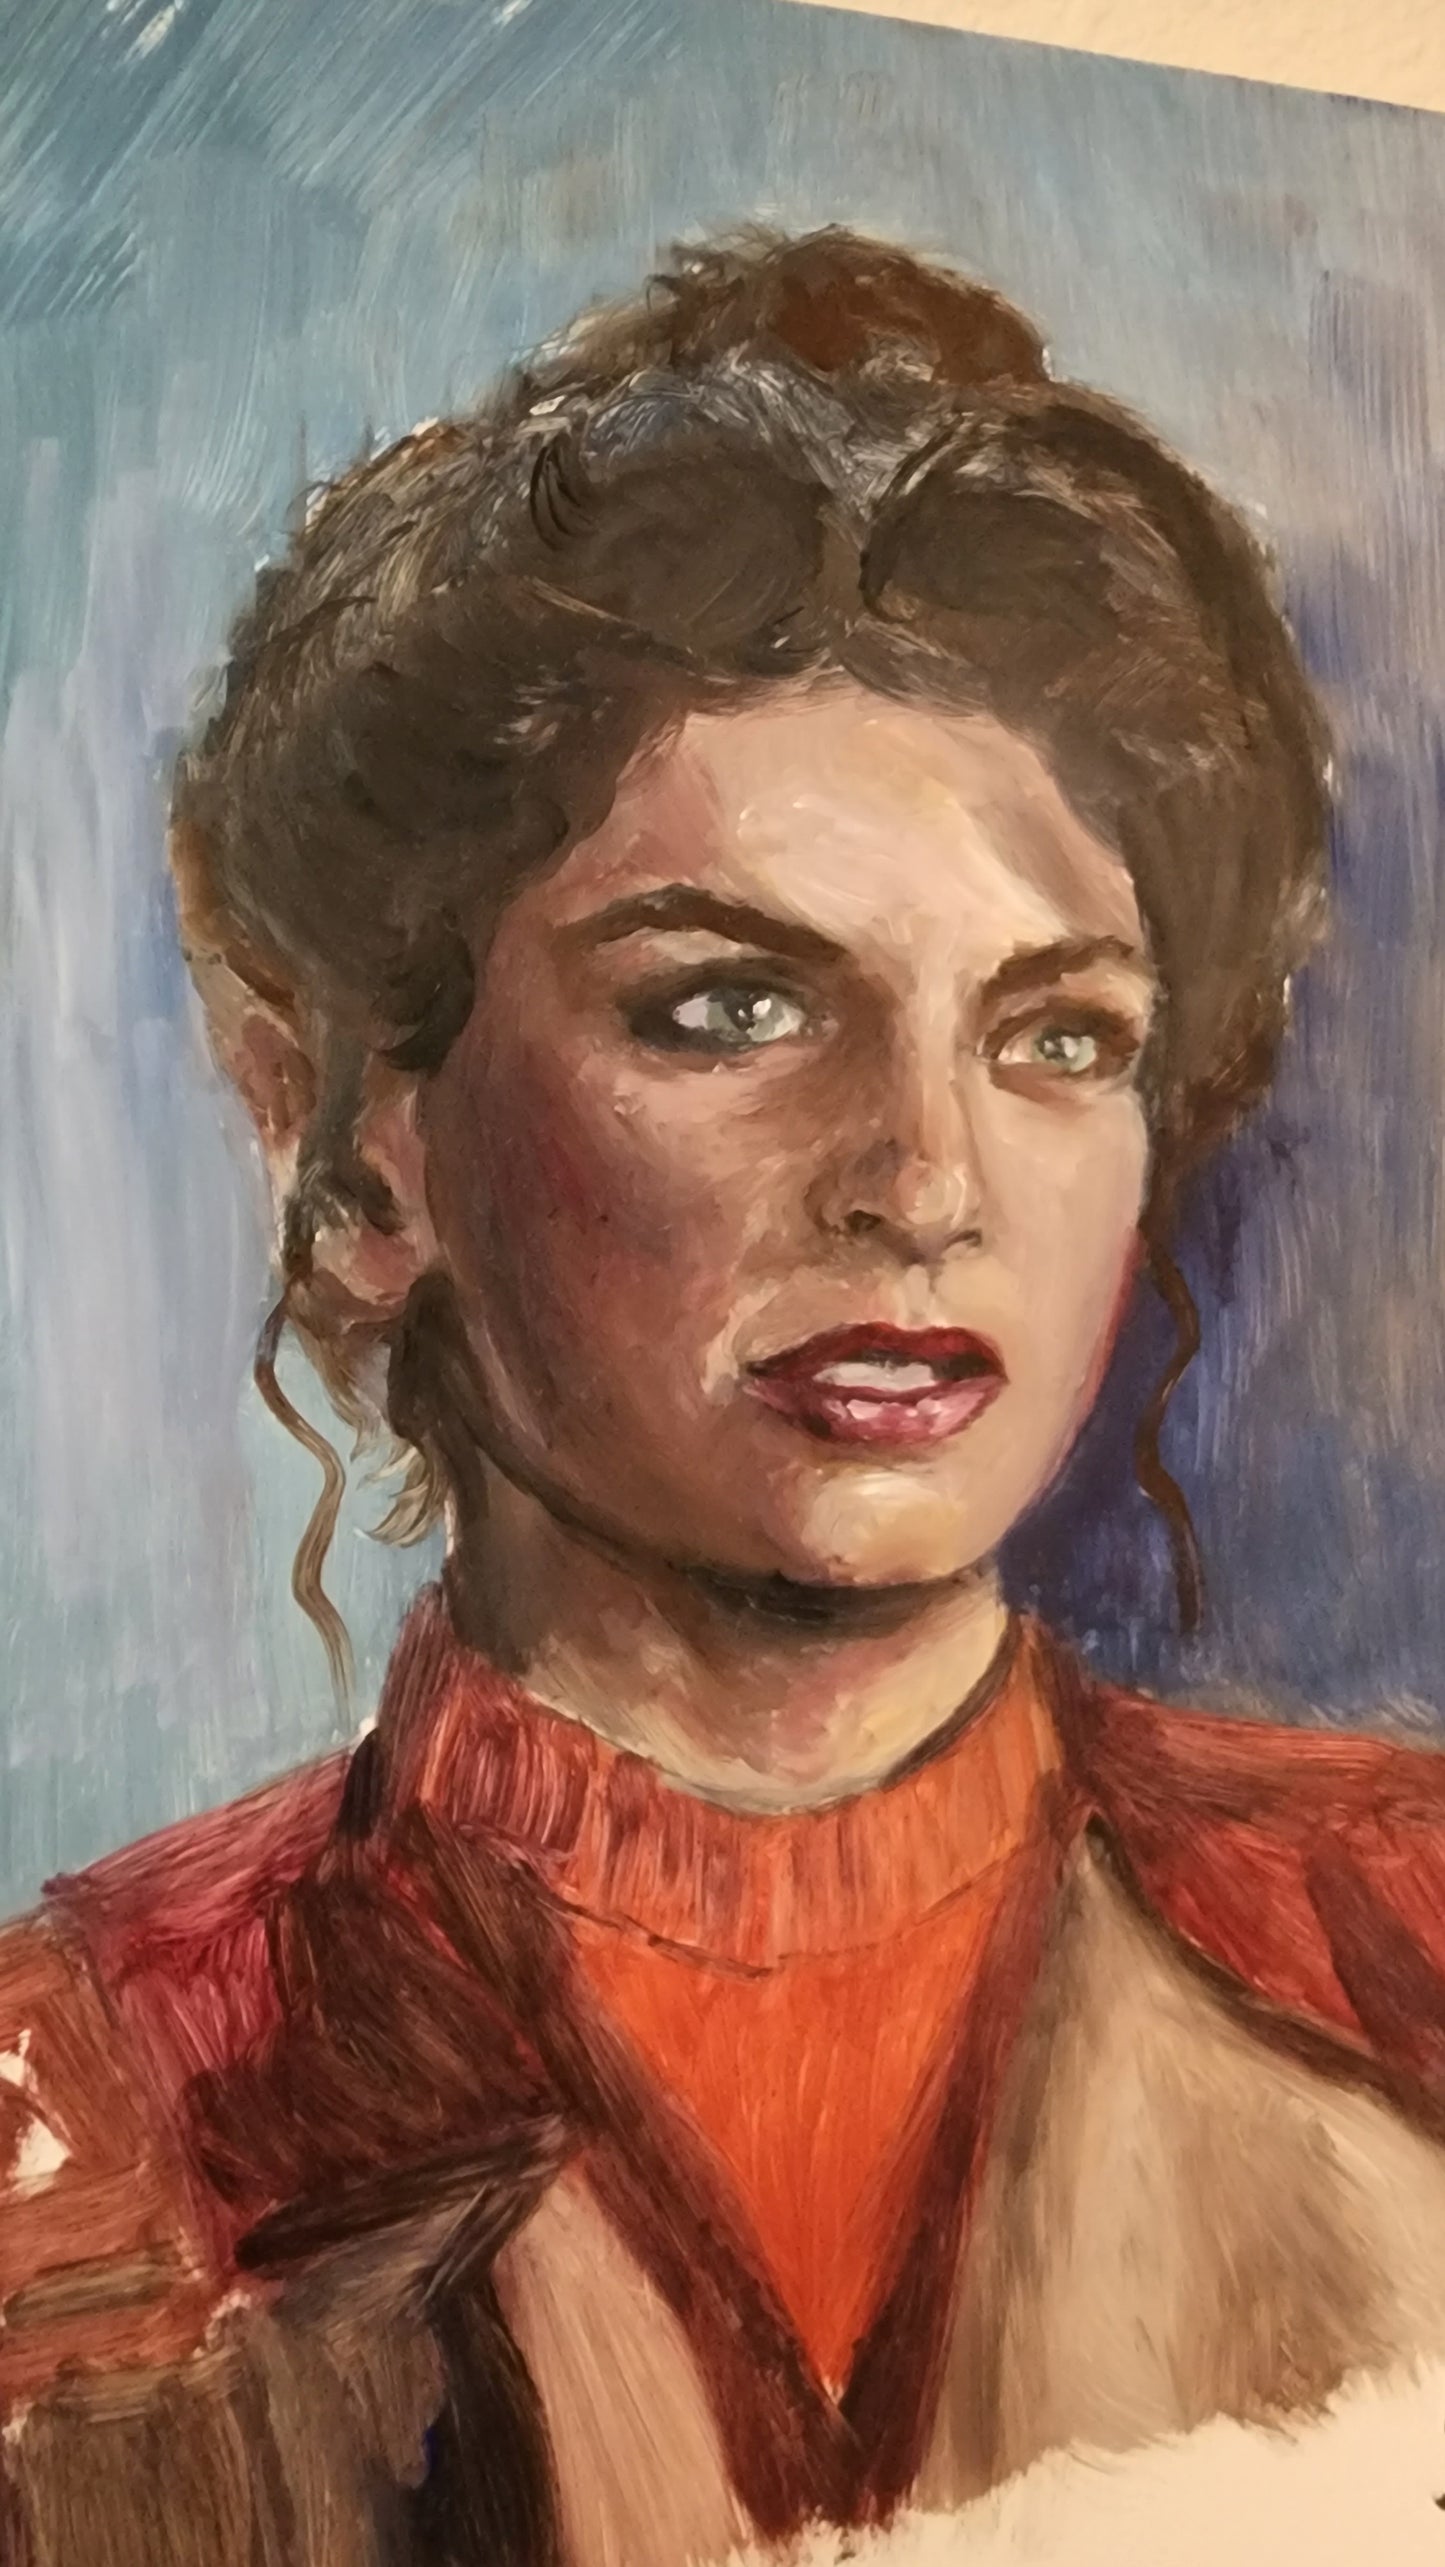 Kirstie Alley "ST2" Painting